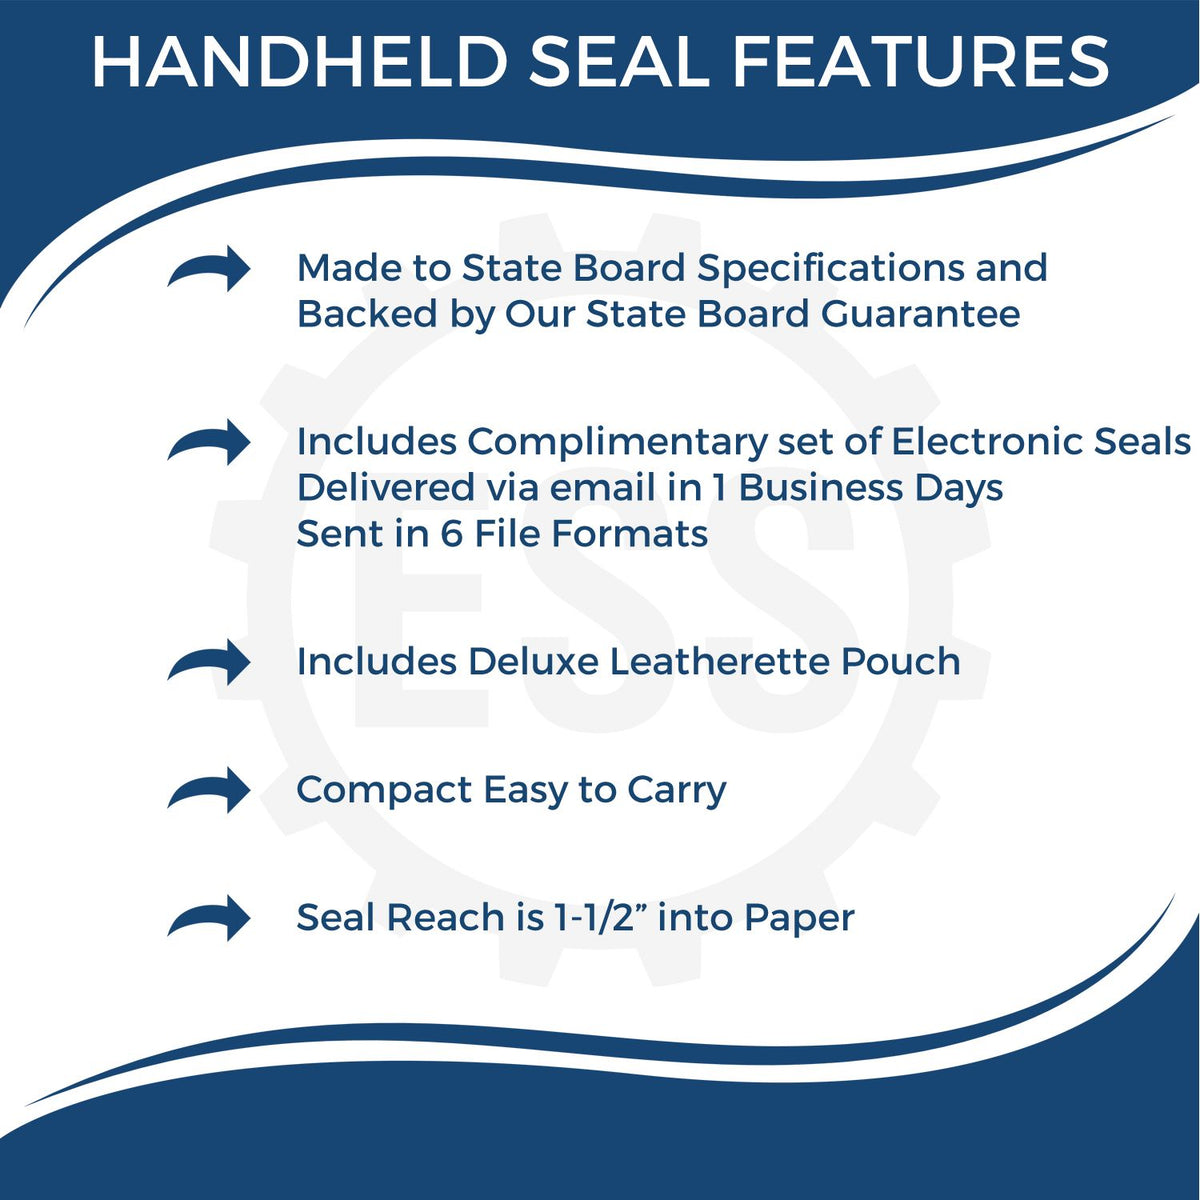 A picture of an infographic highlighting the selling points for the Handheld Arkansas Land Surveyor Seal